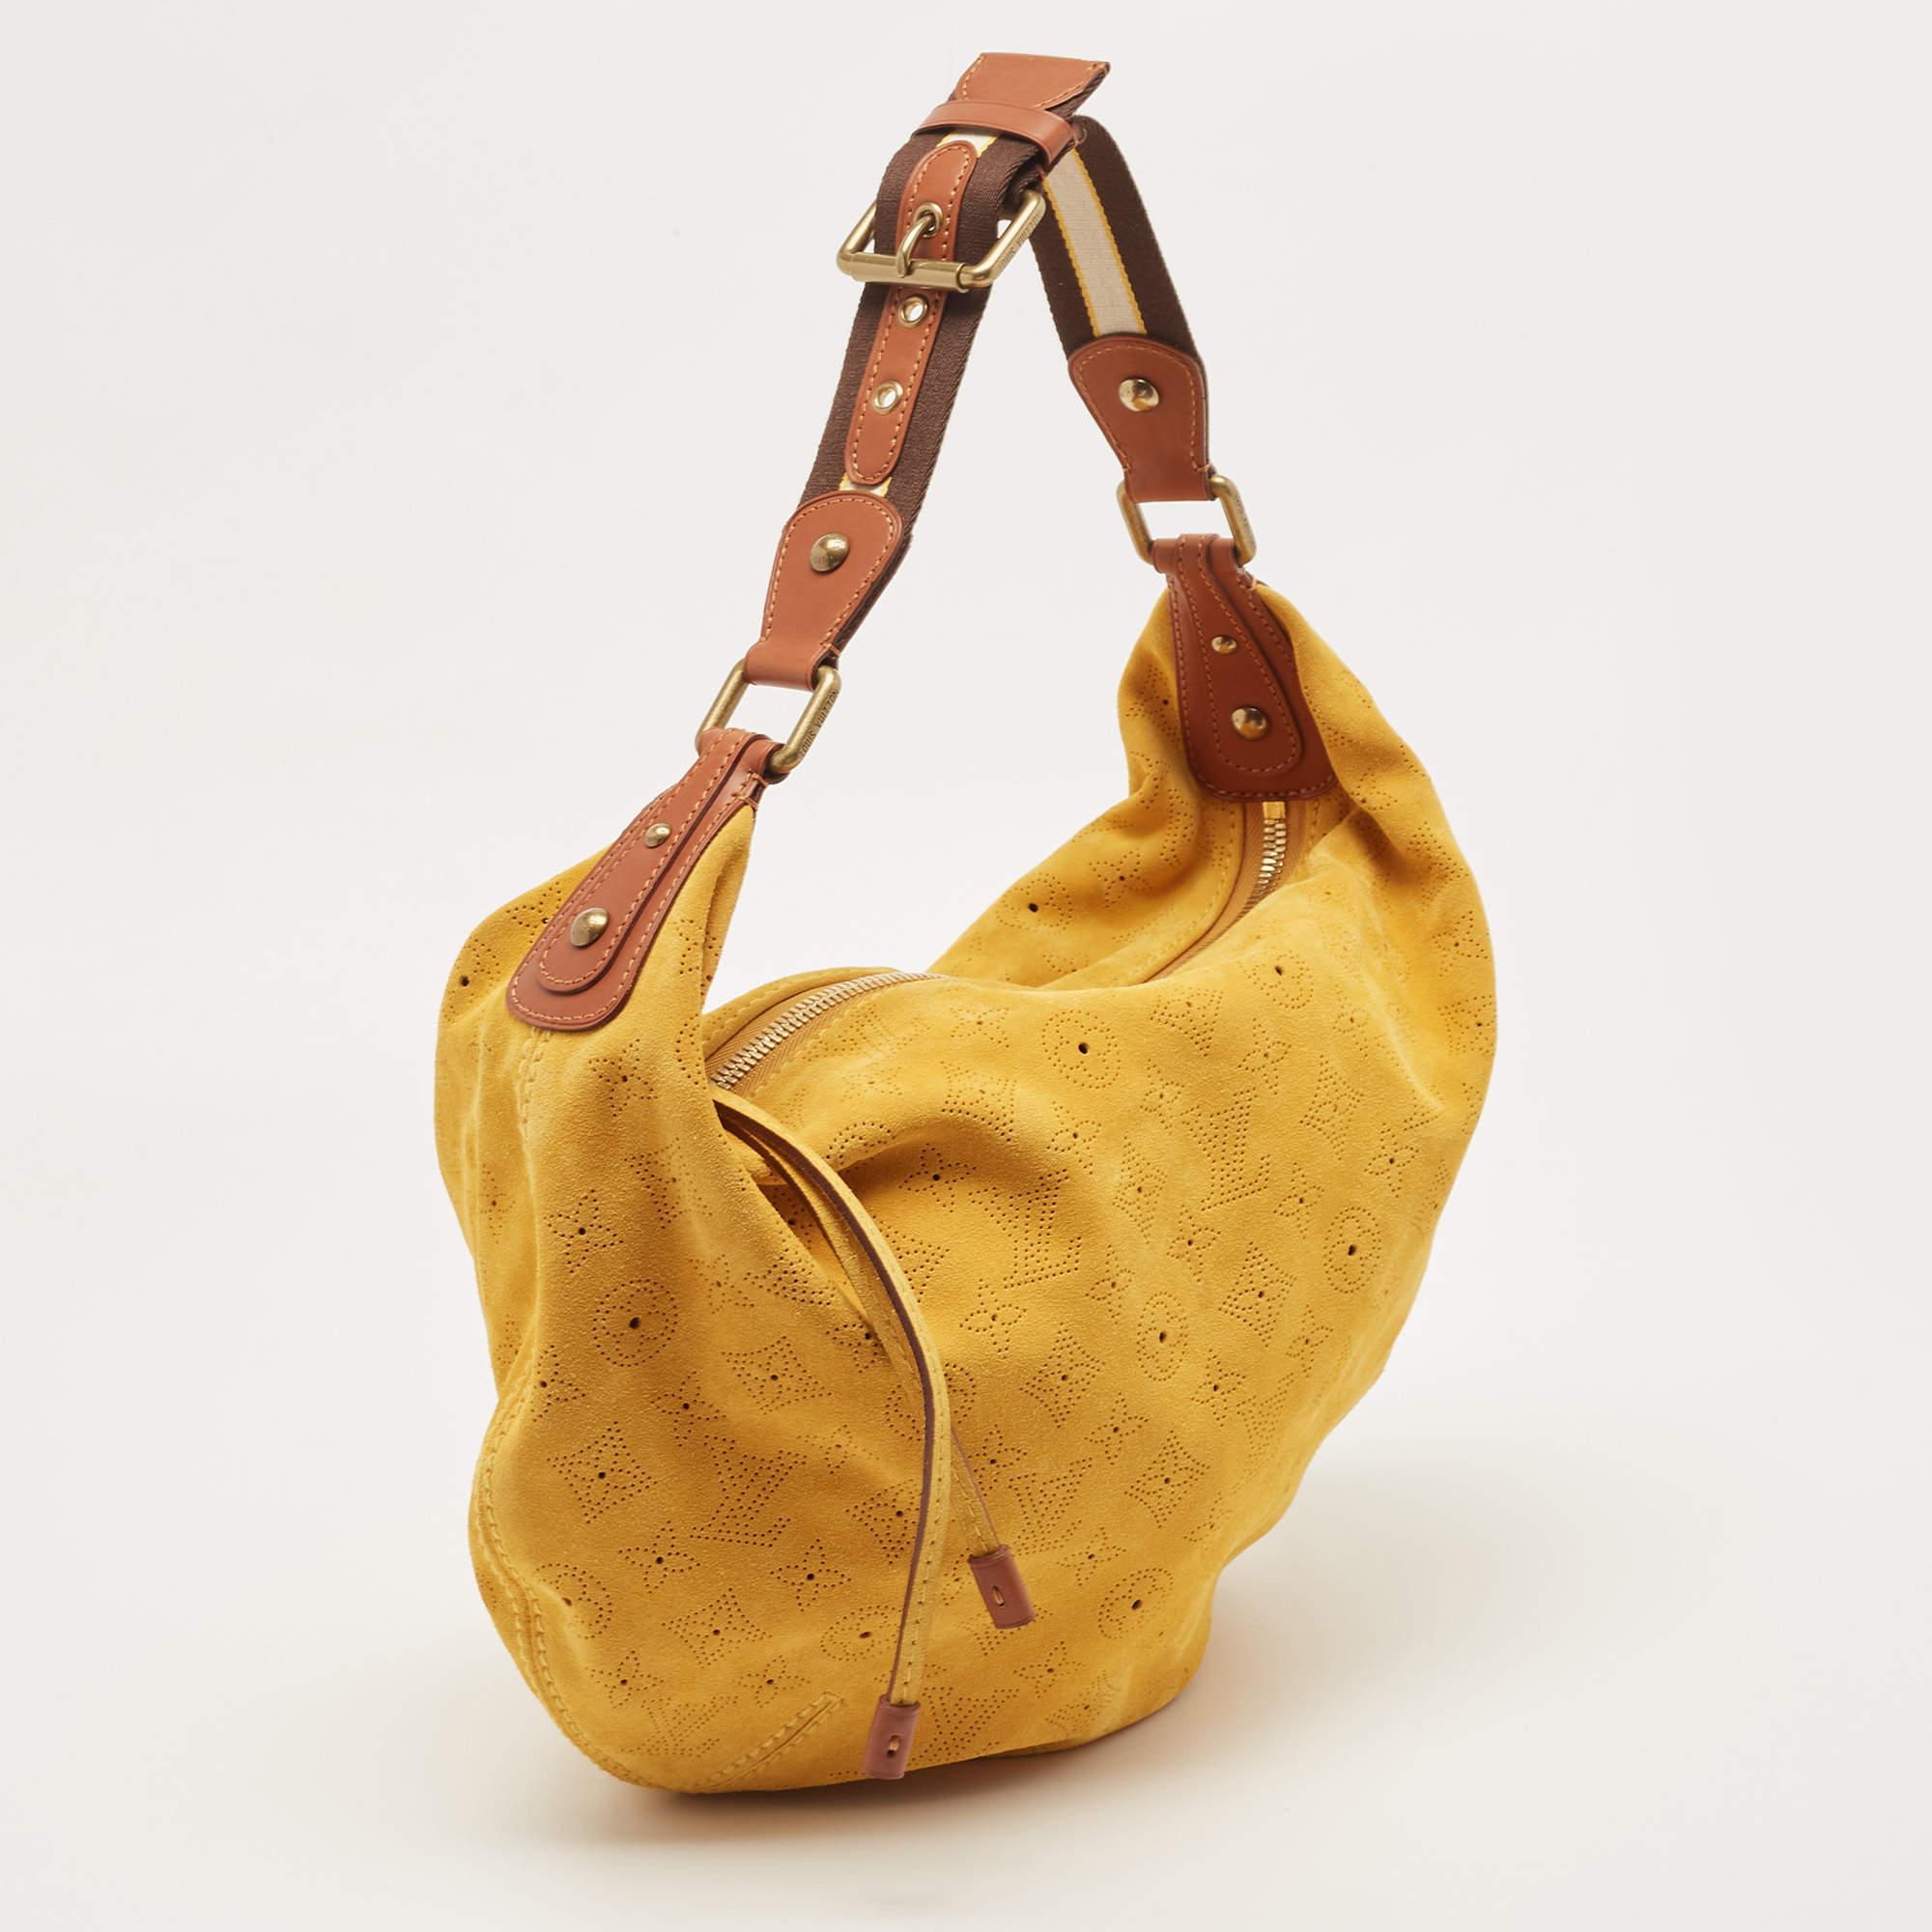 This beautifully stitched suede hobo is by Louis Vuitton. With a capacious fabric-lined interior, a comfortable handle, and a fine finish, this maize hobo is bound to offer style and practical ease.

